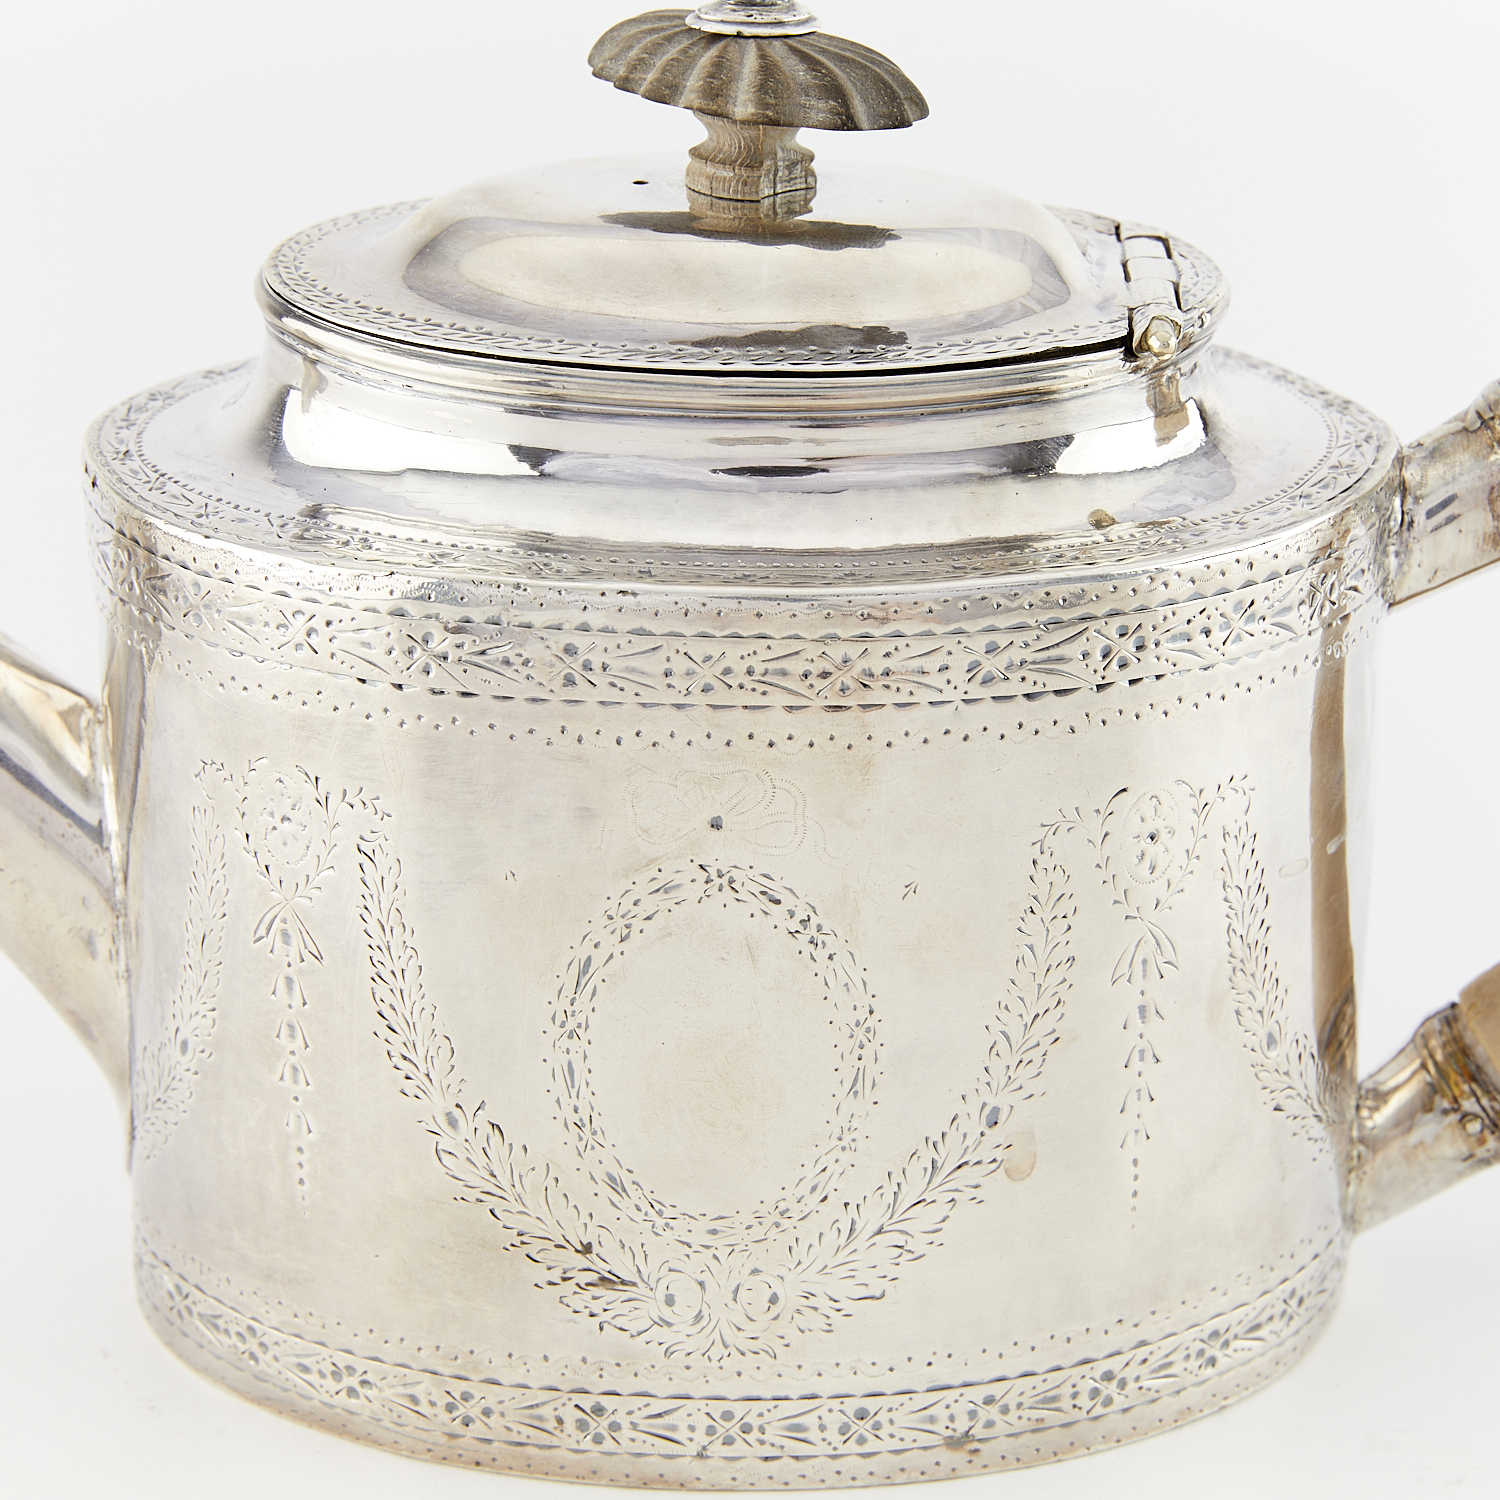 1821 Sterling Silver English Teapot 11.08 ozt - Image 8 of 11